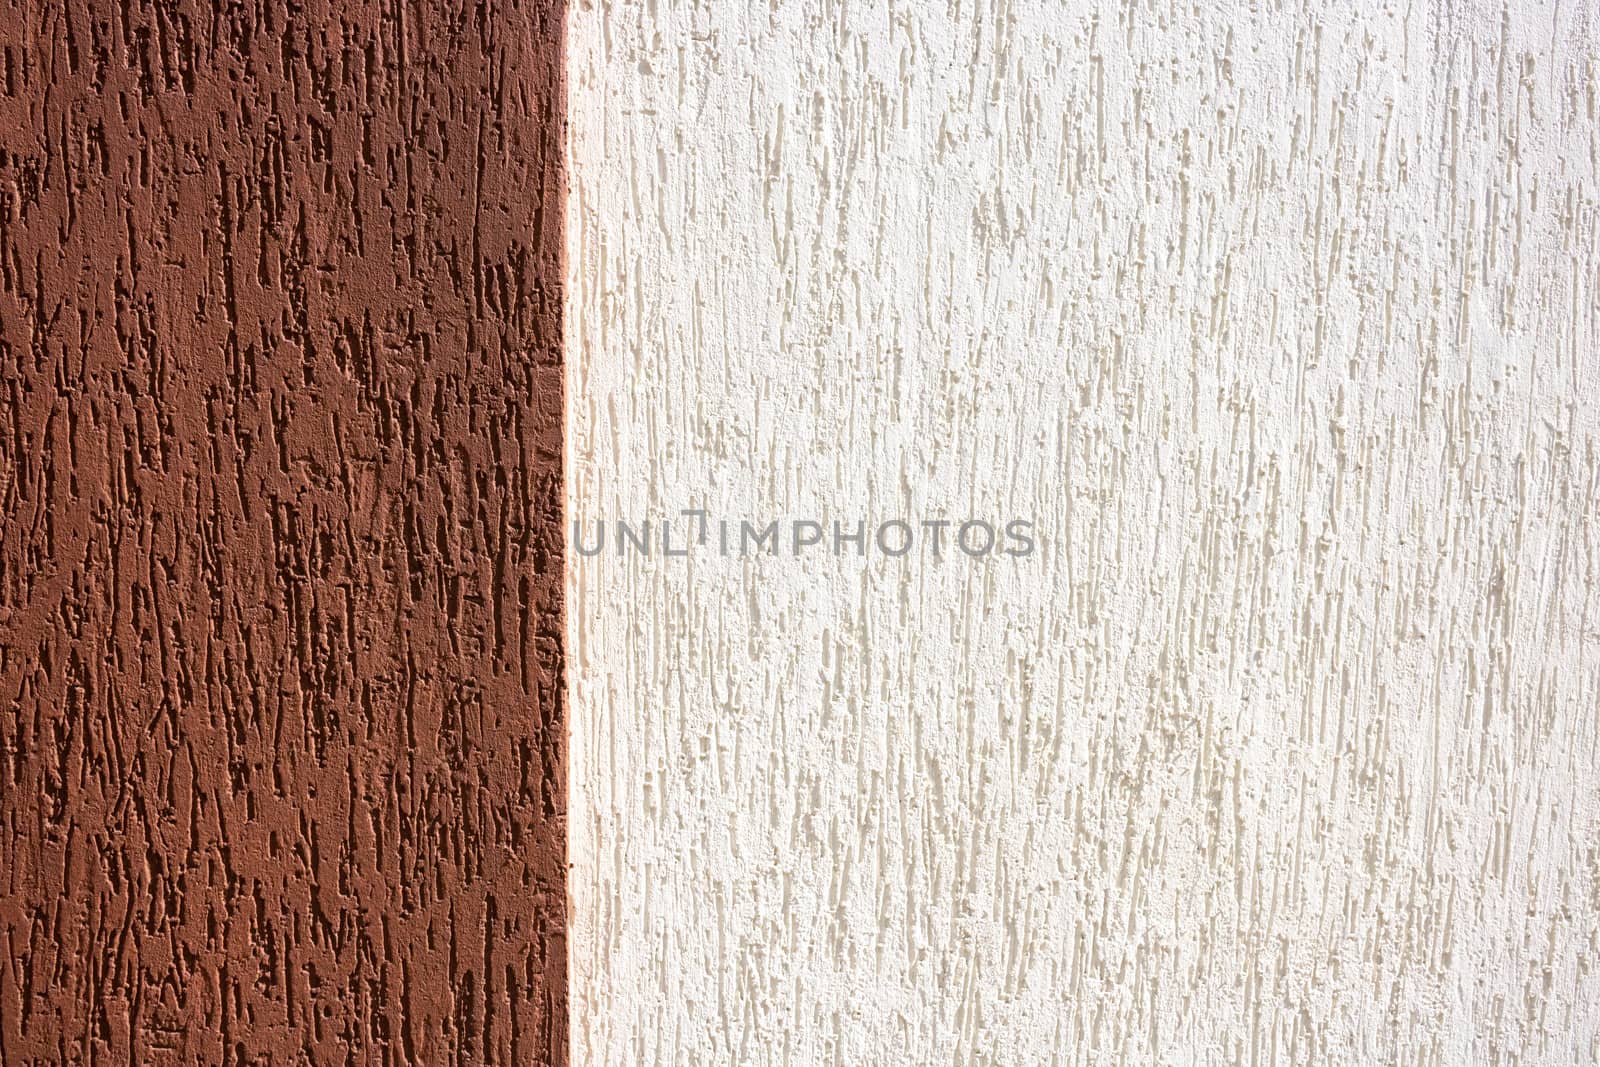 Decorative plaster background in two colors brown and white.